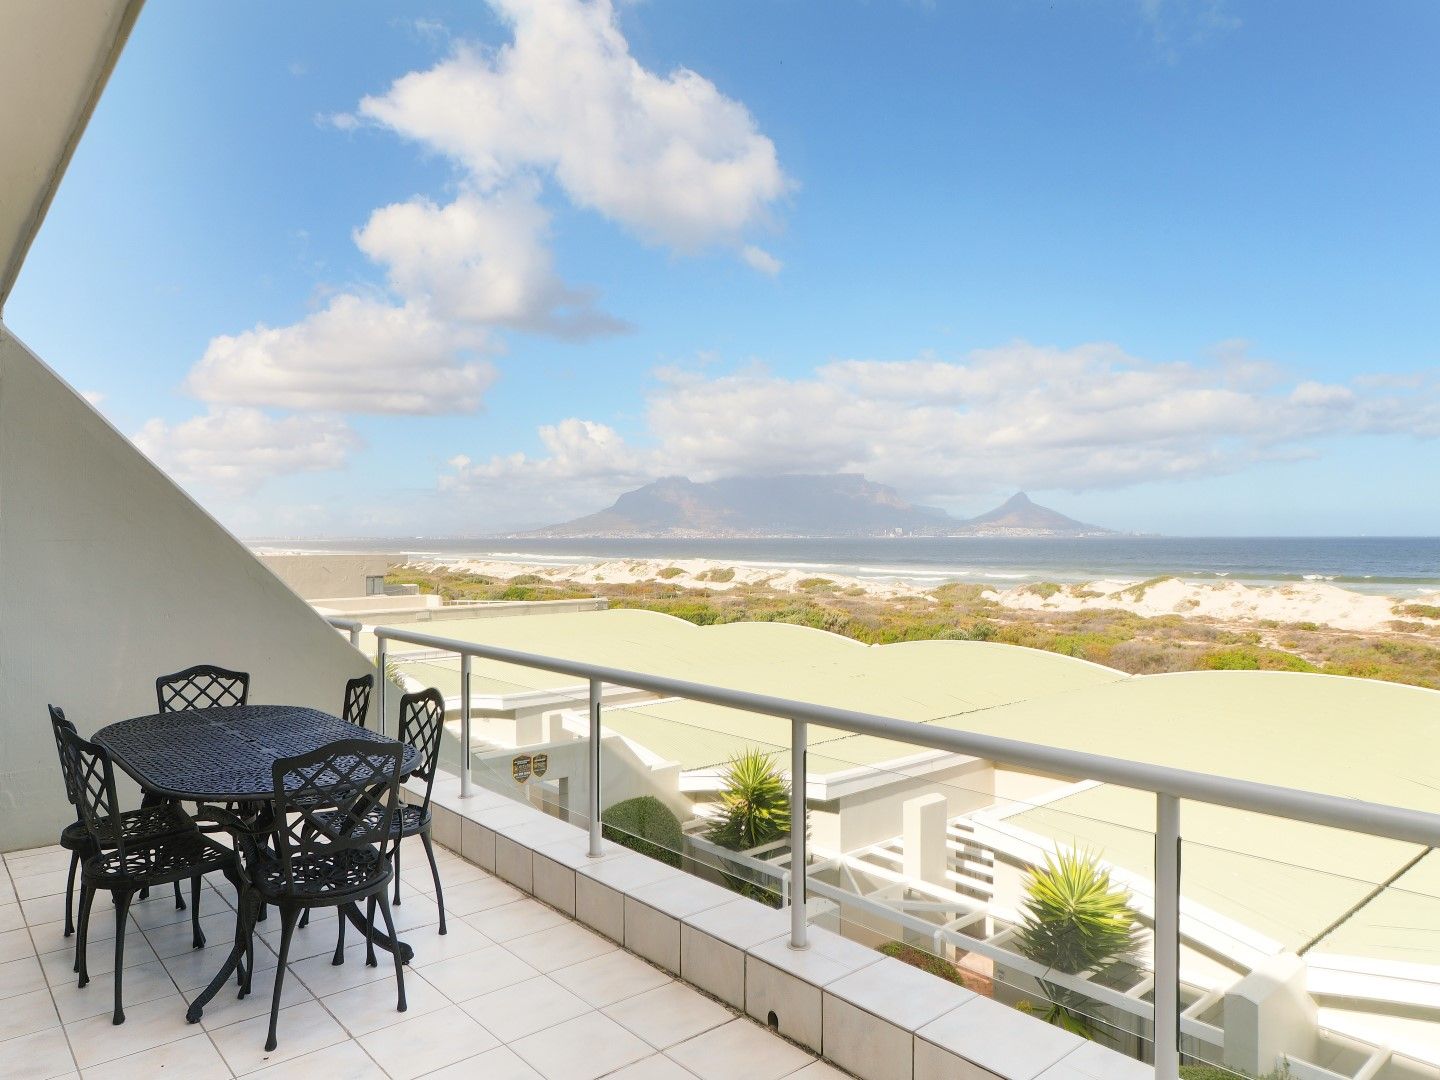 Photo 10 of Dolphin Beach Beauty accommodation in Bloubergstrand, Cape Town with 3 bedrooms and 2 bathrooms